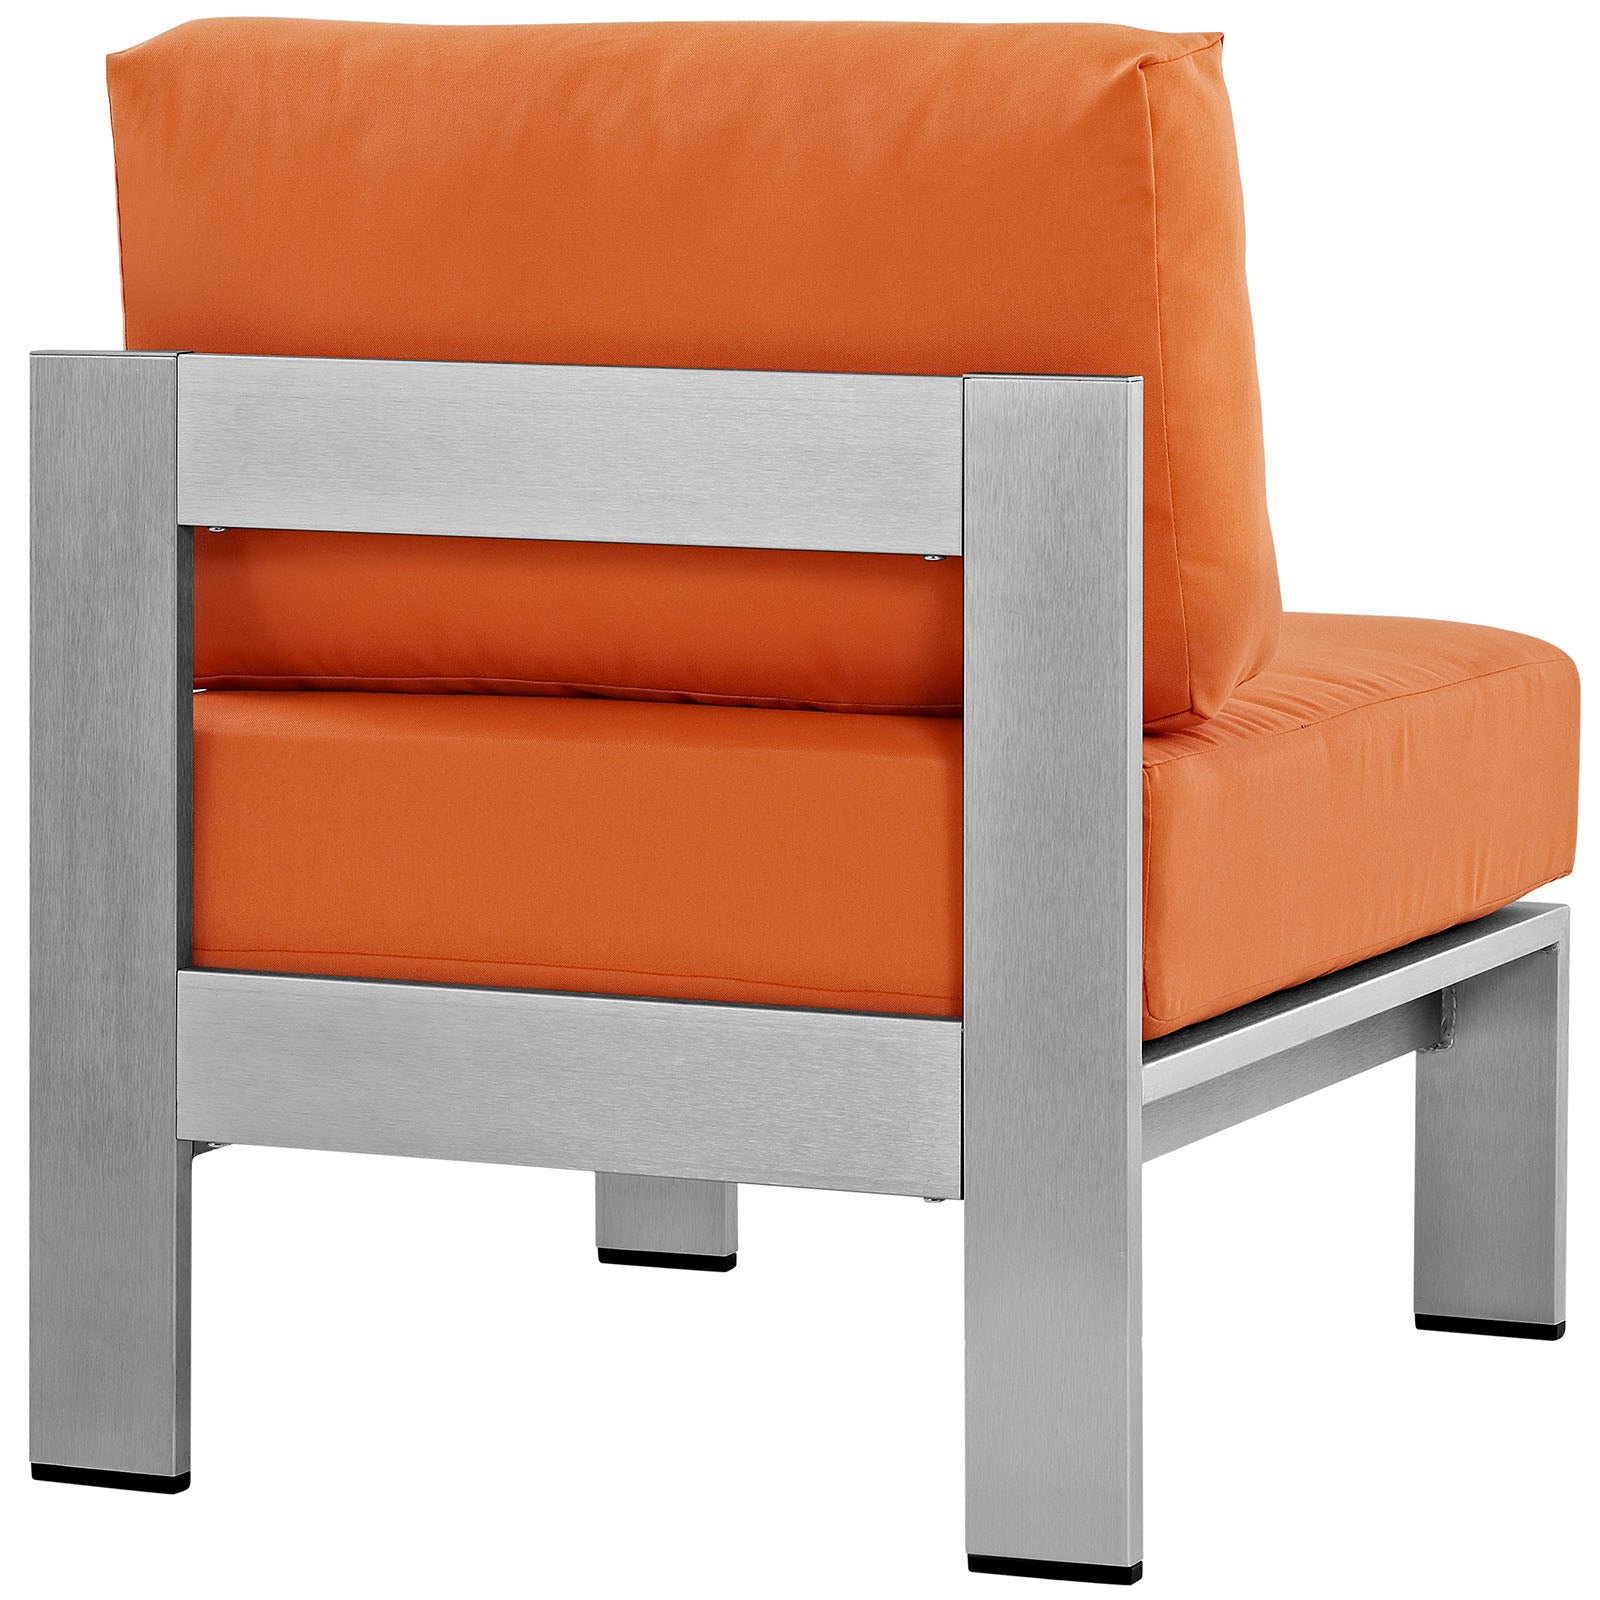 Shore Armless Outdoor Patio Aluminum Chair - East Shore Modern Home Furnishings